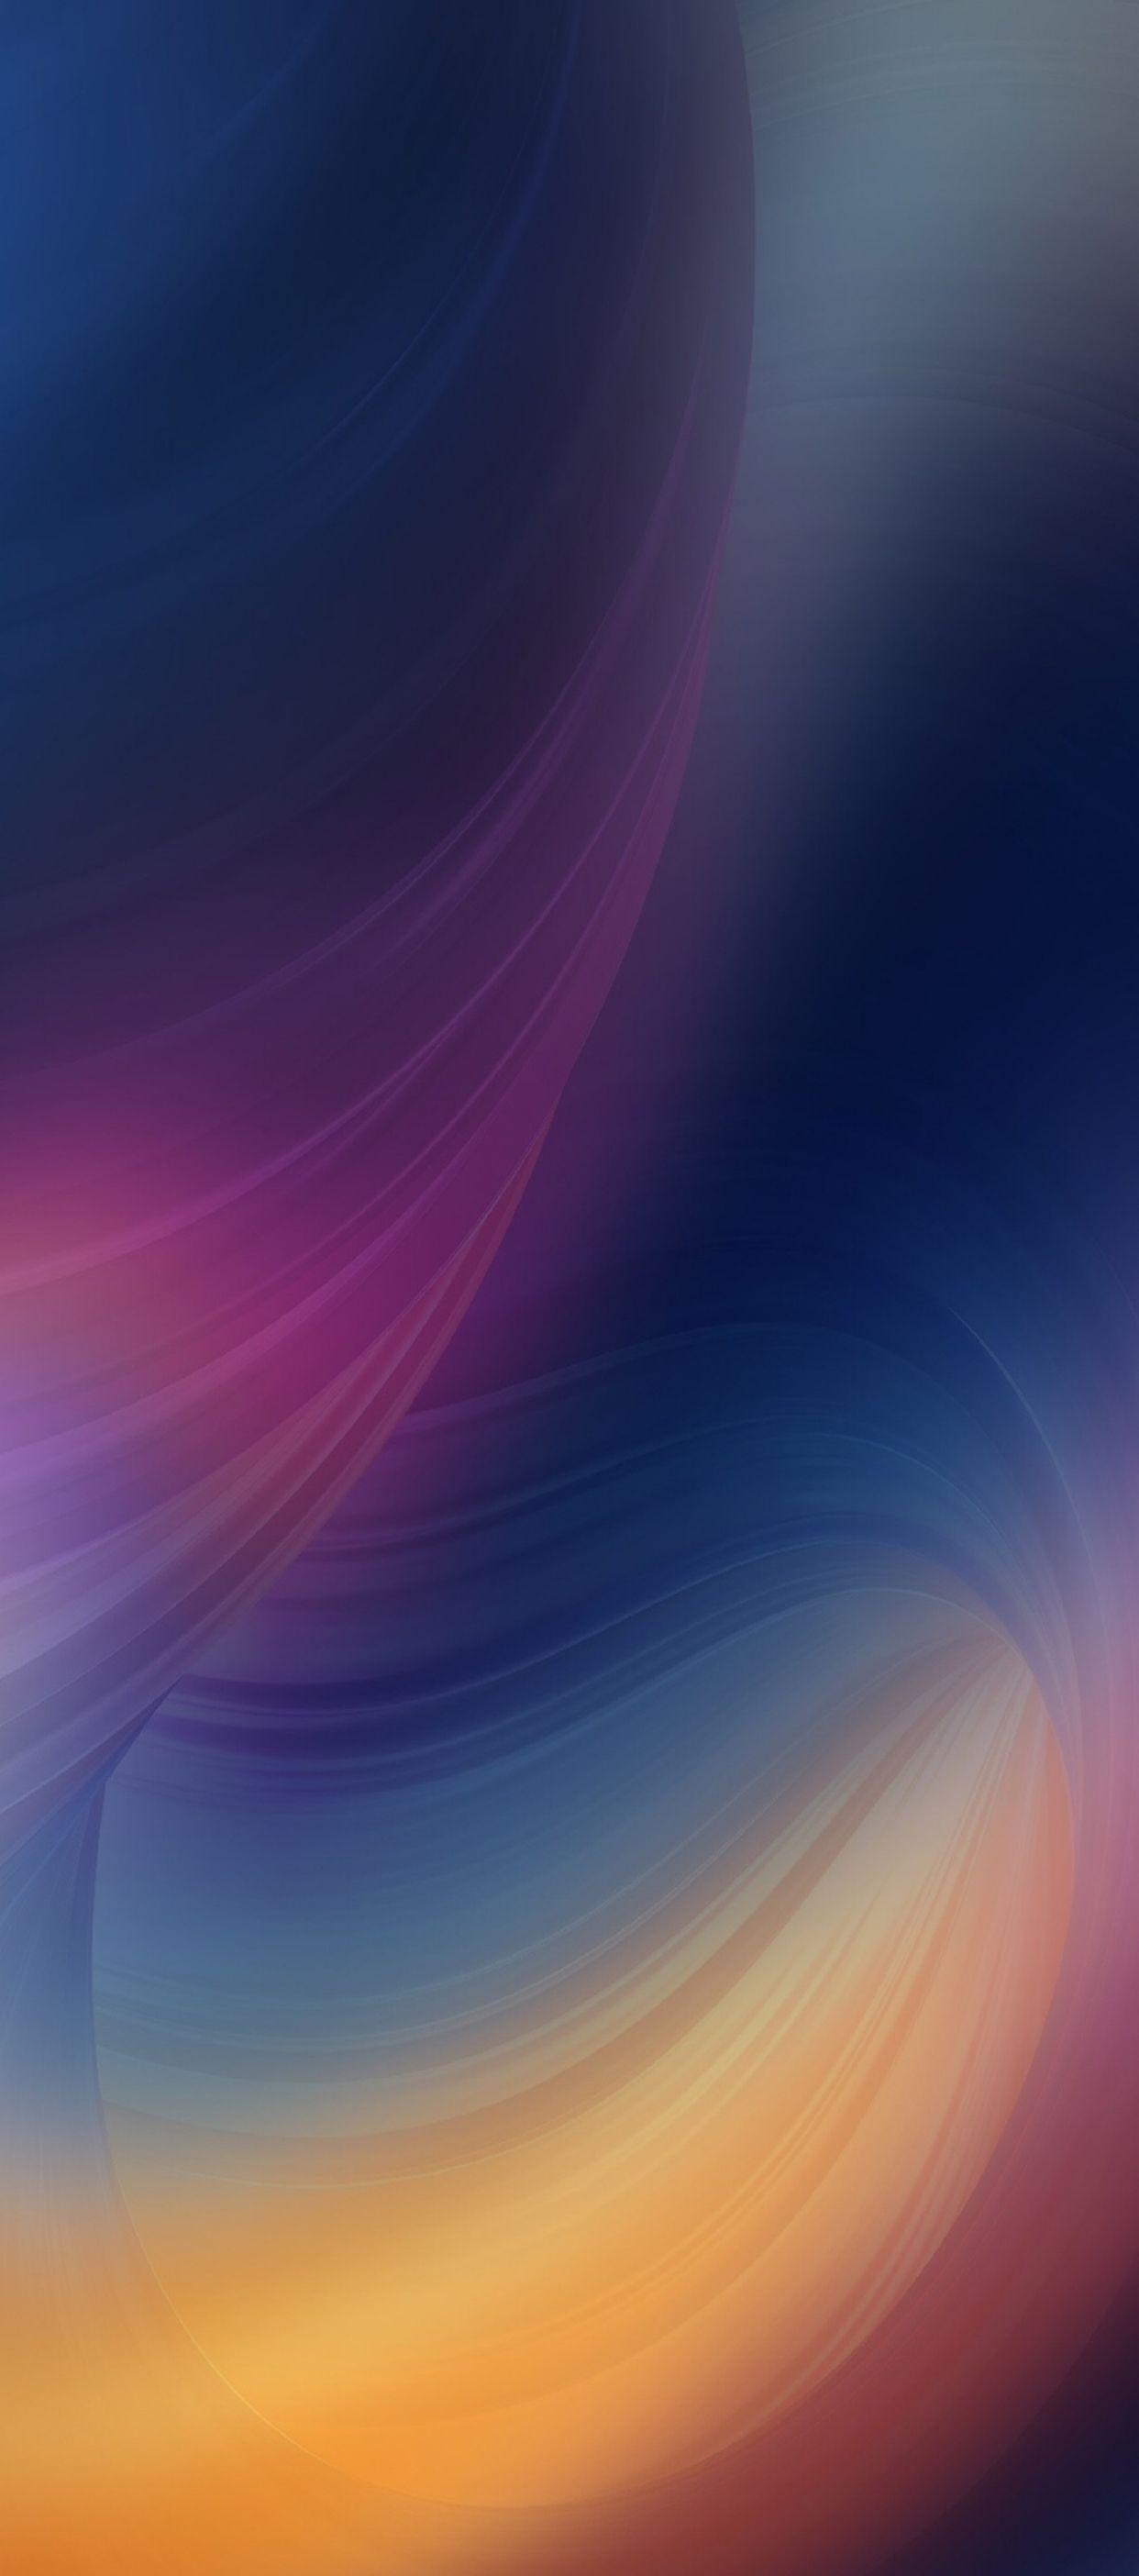 iOS iPhone X, purple, blue, clean, simple, abstract